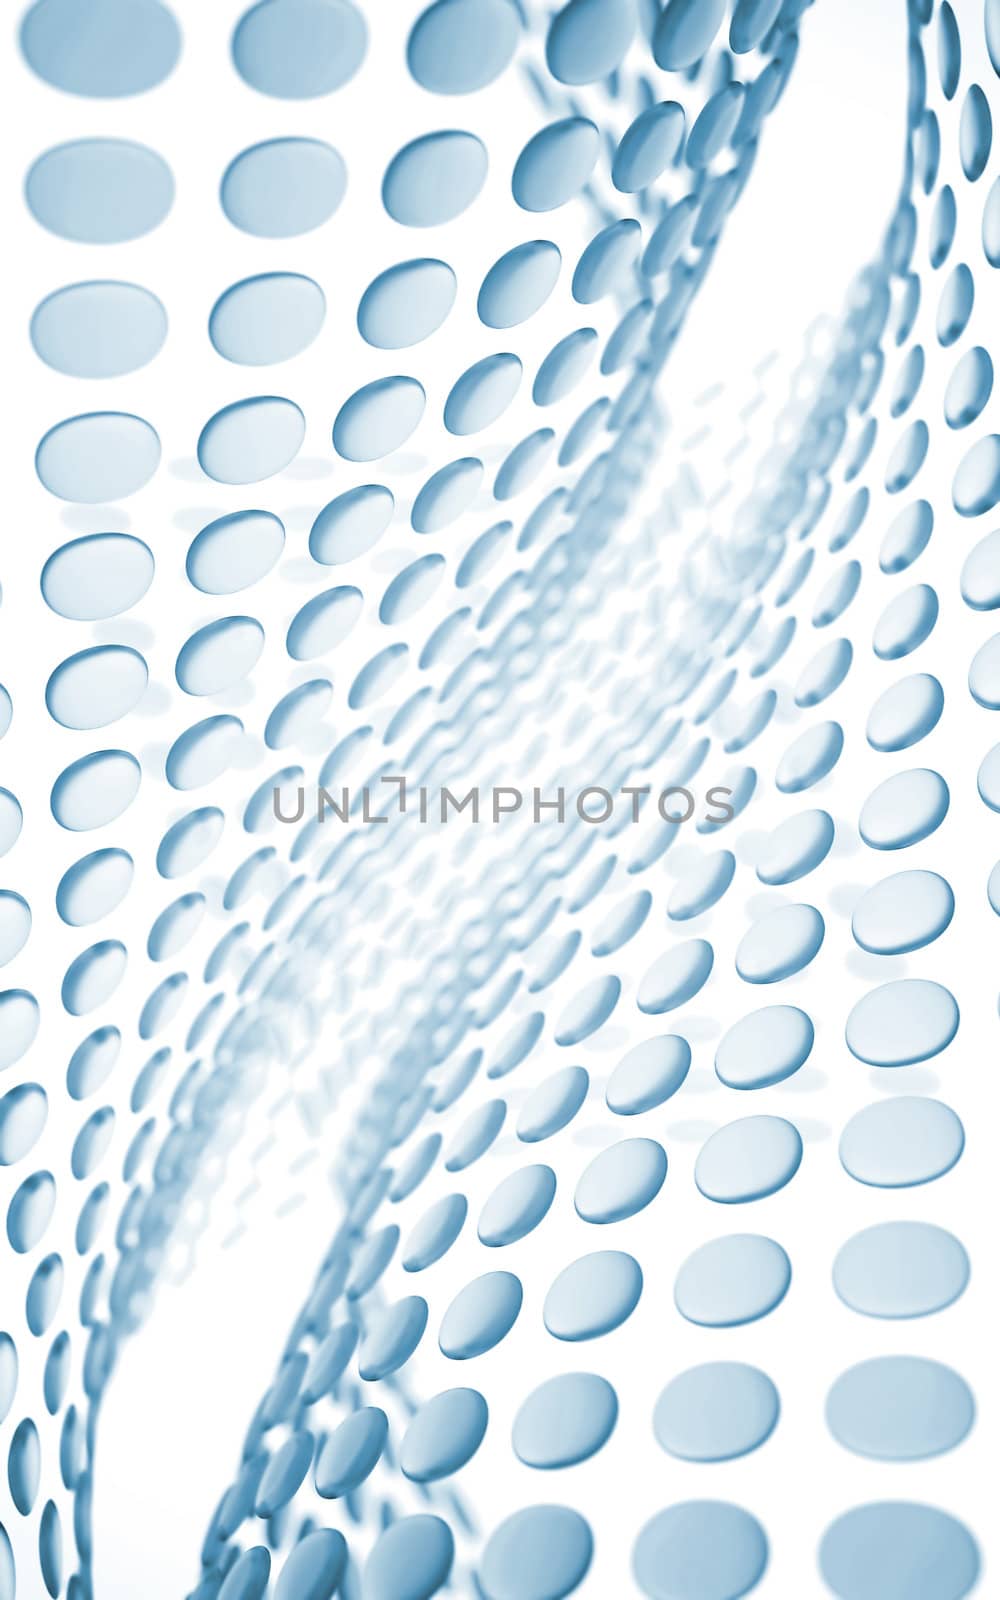 abstract wave of blue plates as a scientific and technological background by Serp